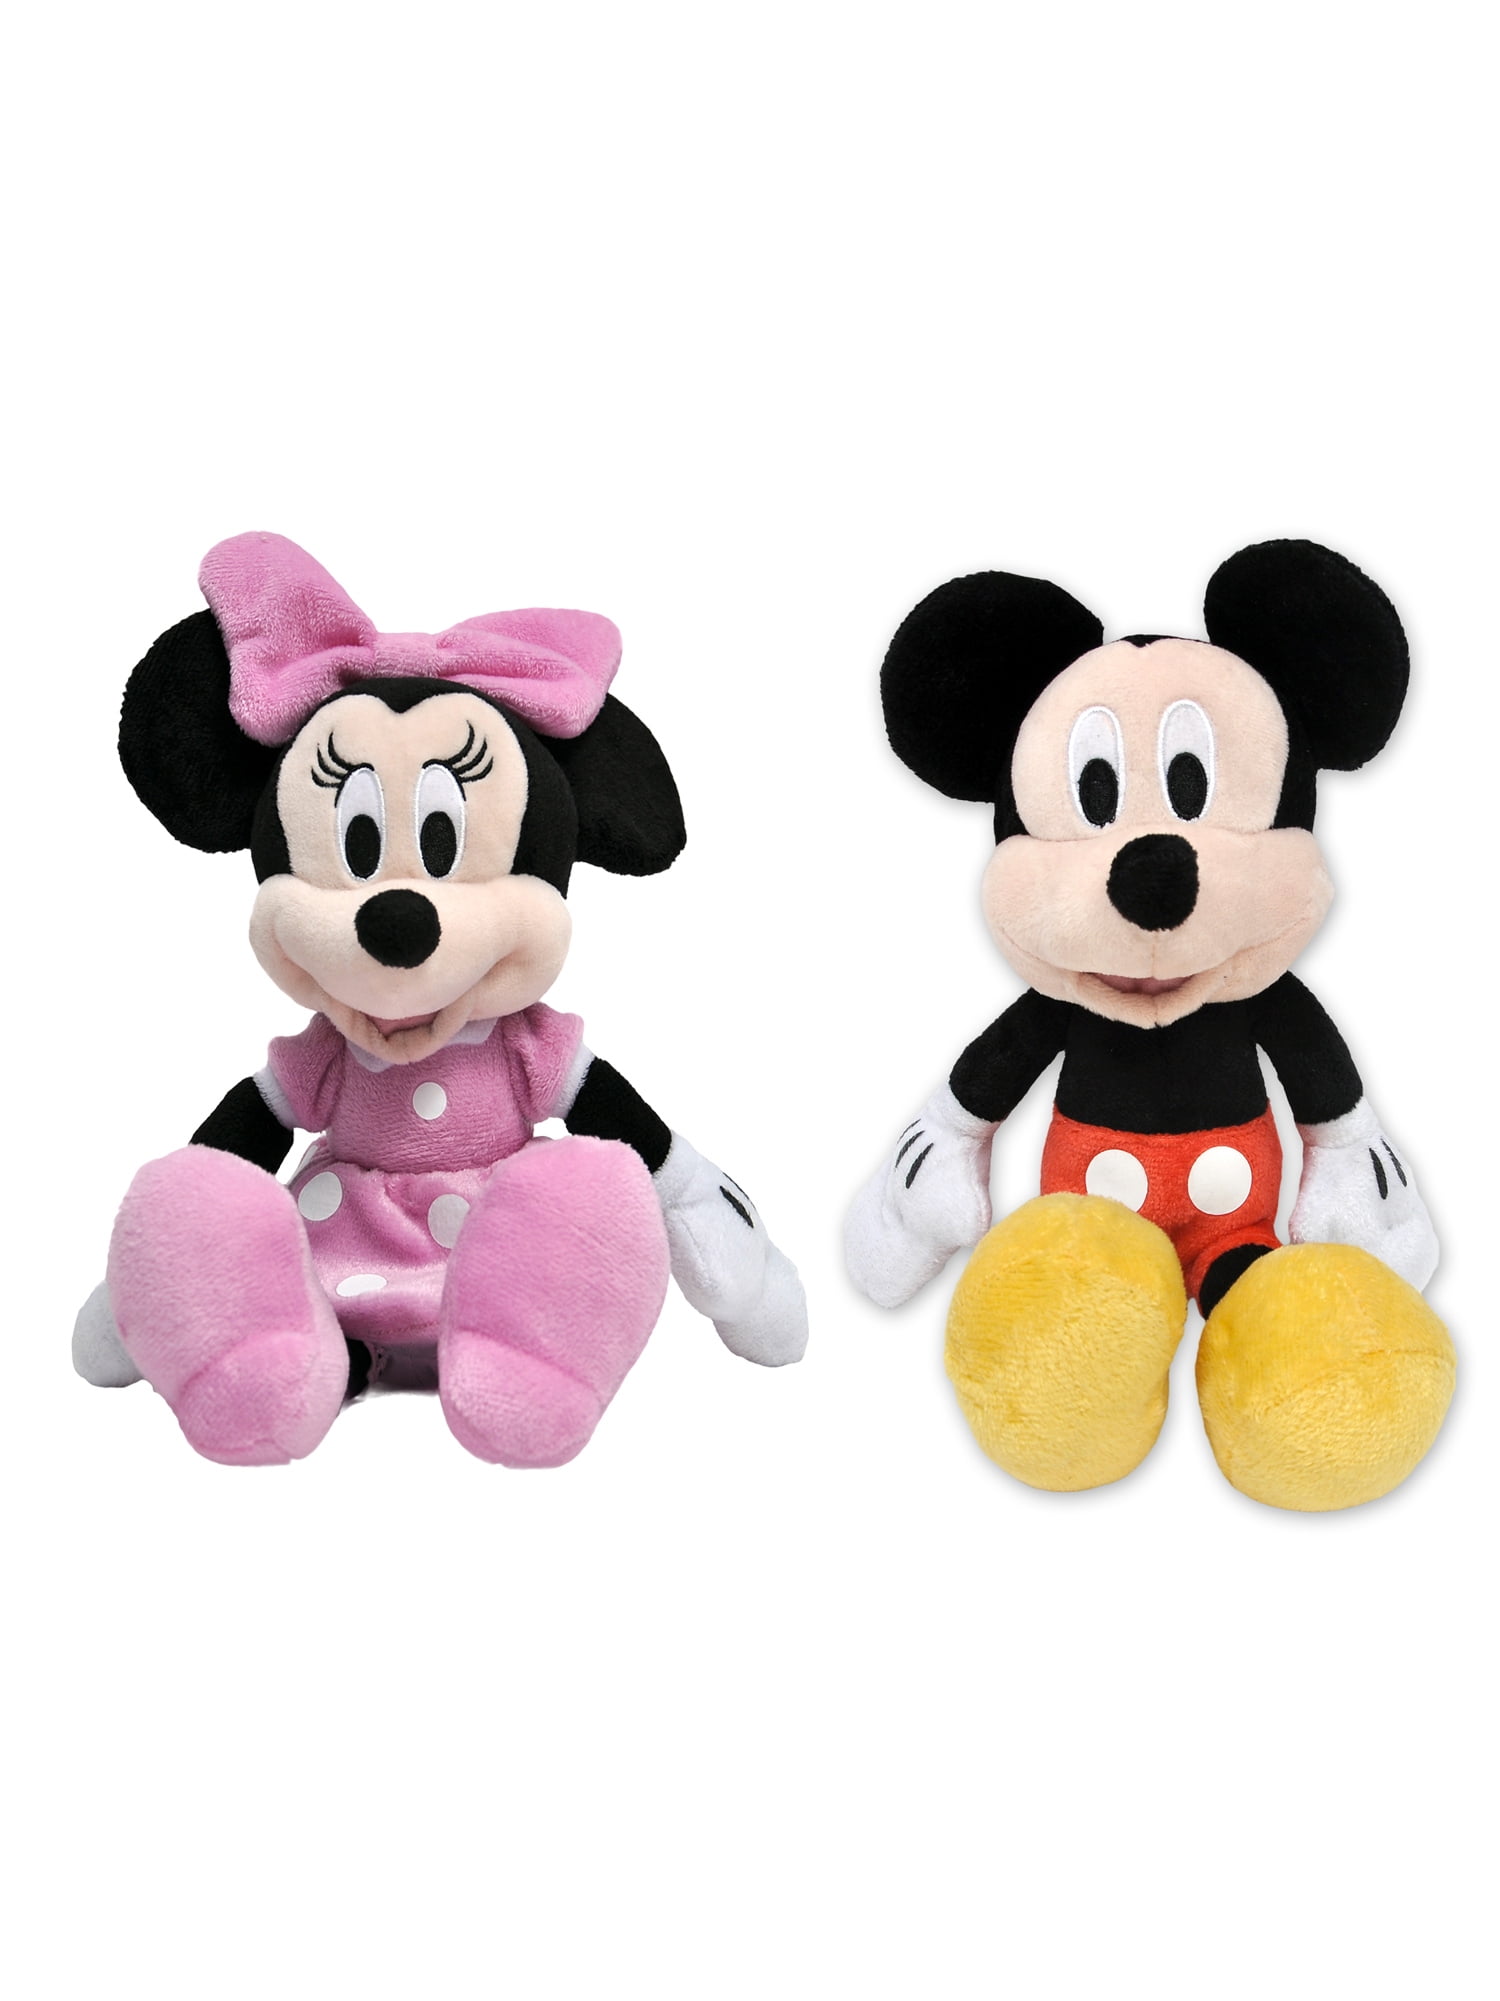 Disney Mickey Mouse Clubhouse 11 inch Stuffed Plush Doll for sale online 